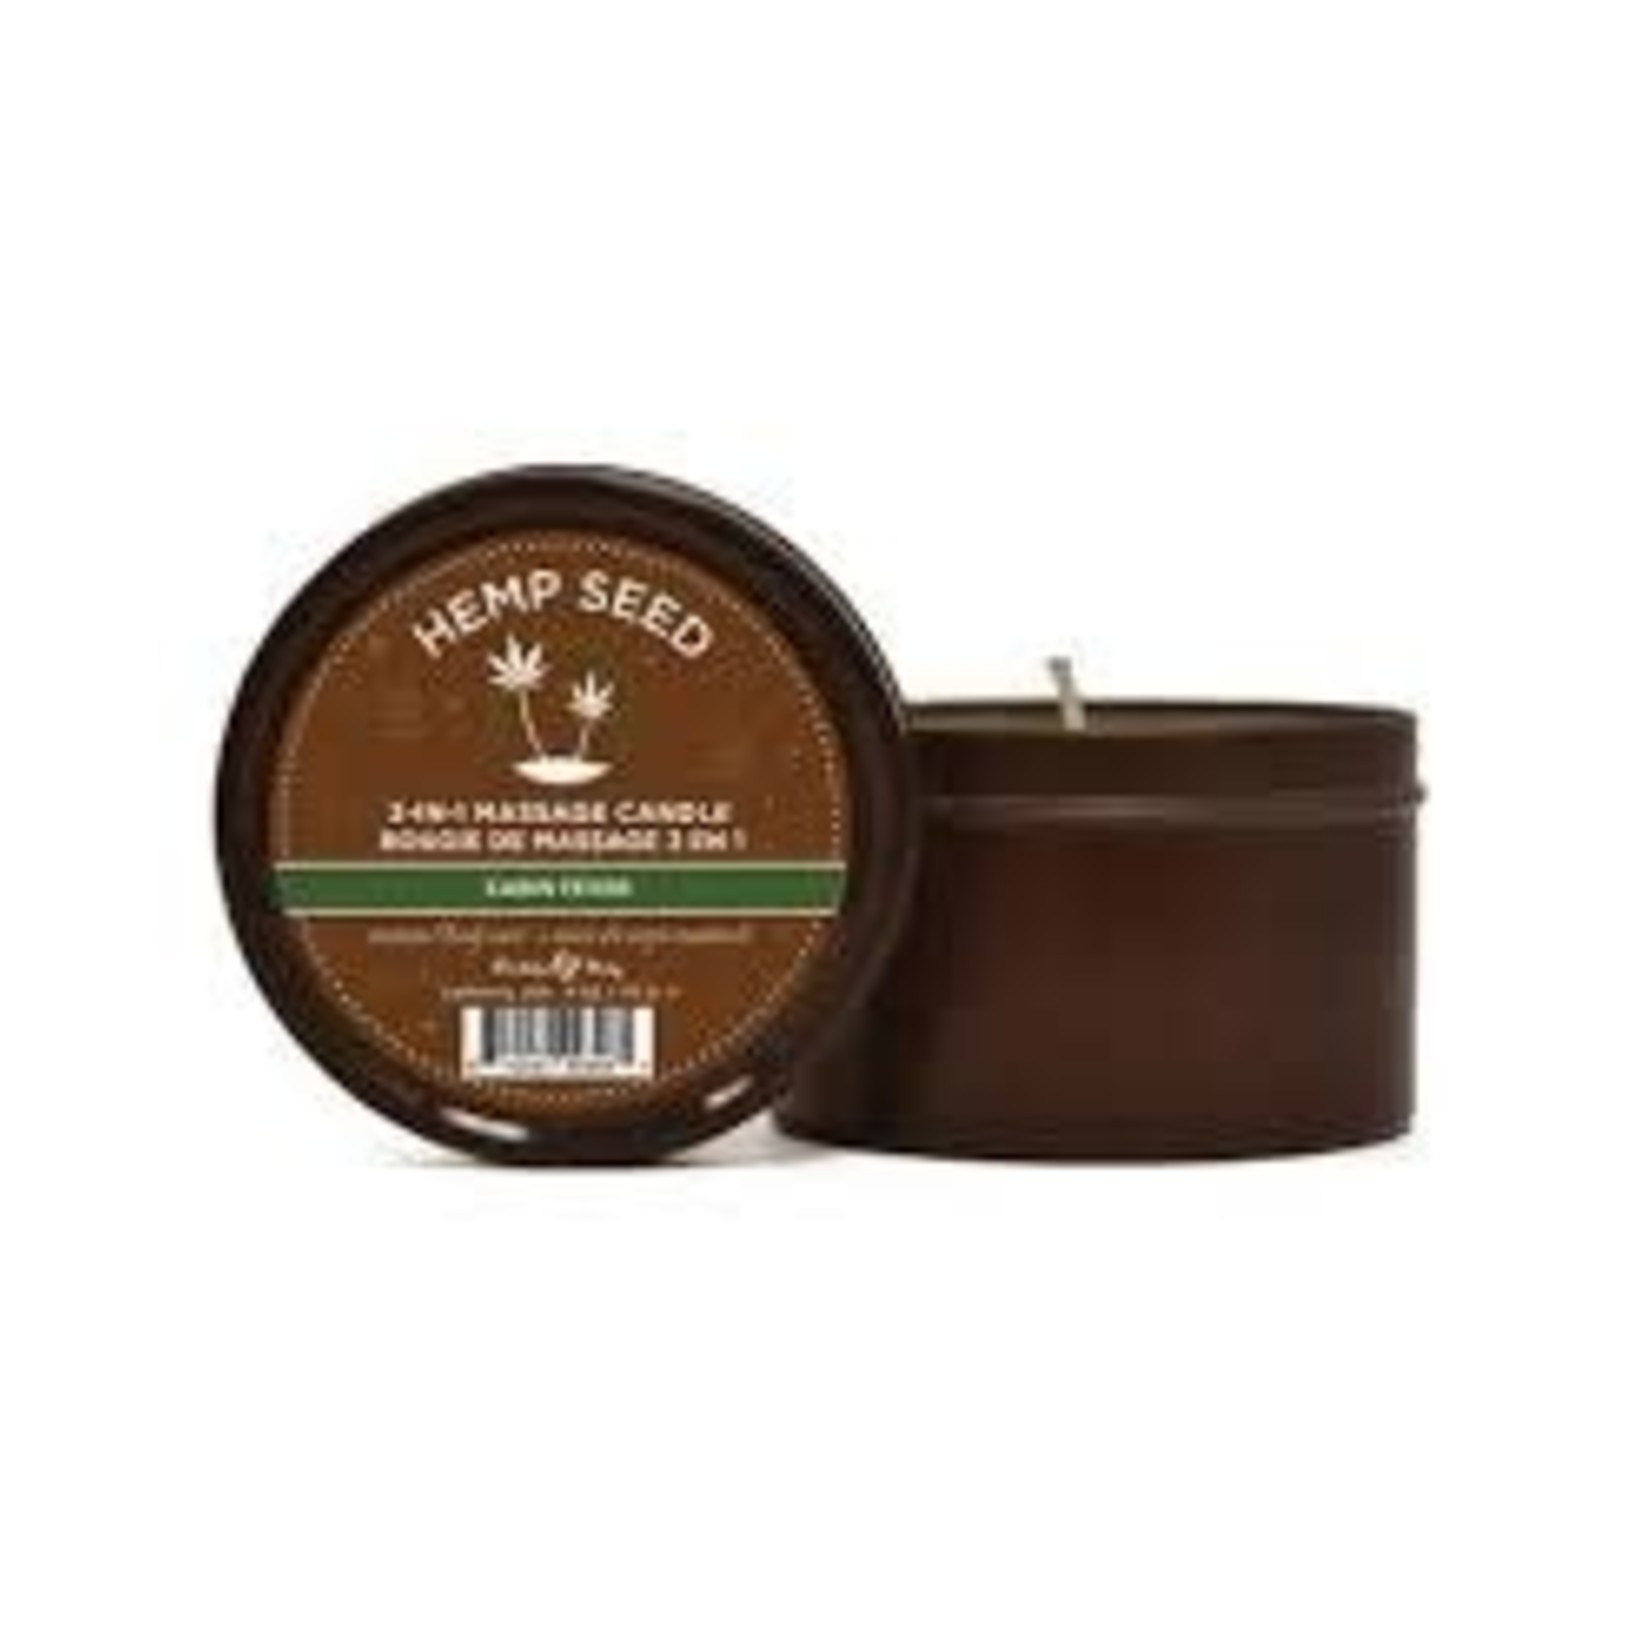 EARTHLY BODY EARTHLY BODY 3-IN-1 MASSAGE CANDLE 6OZ/170G CABIN FEVER